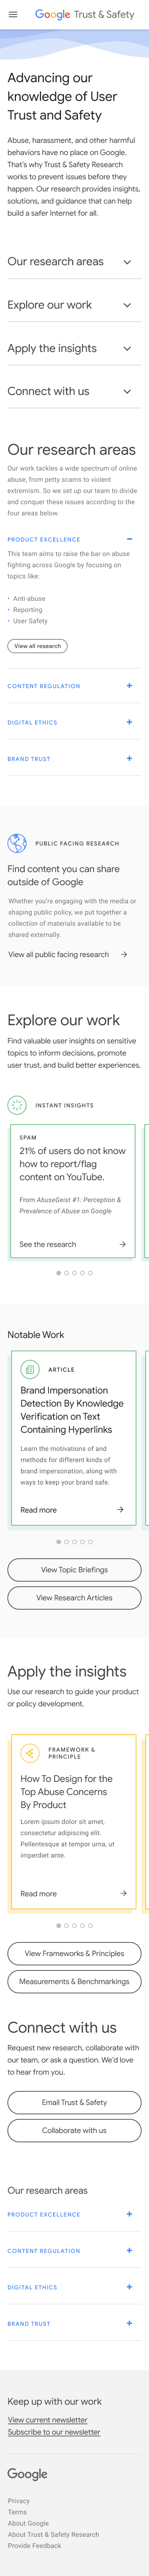 Mobile version of the Landing Page, with one of the research team accordion drawers expanded.